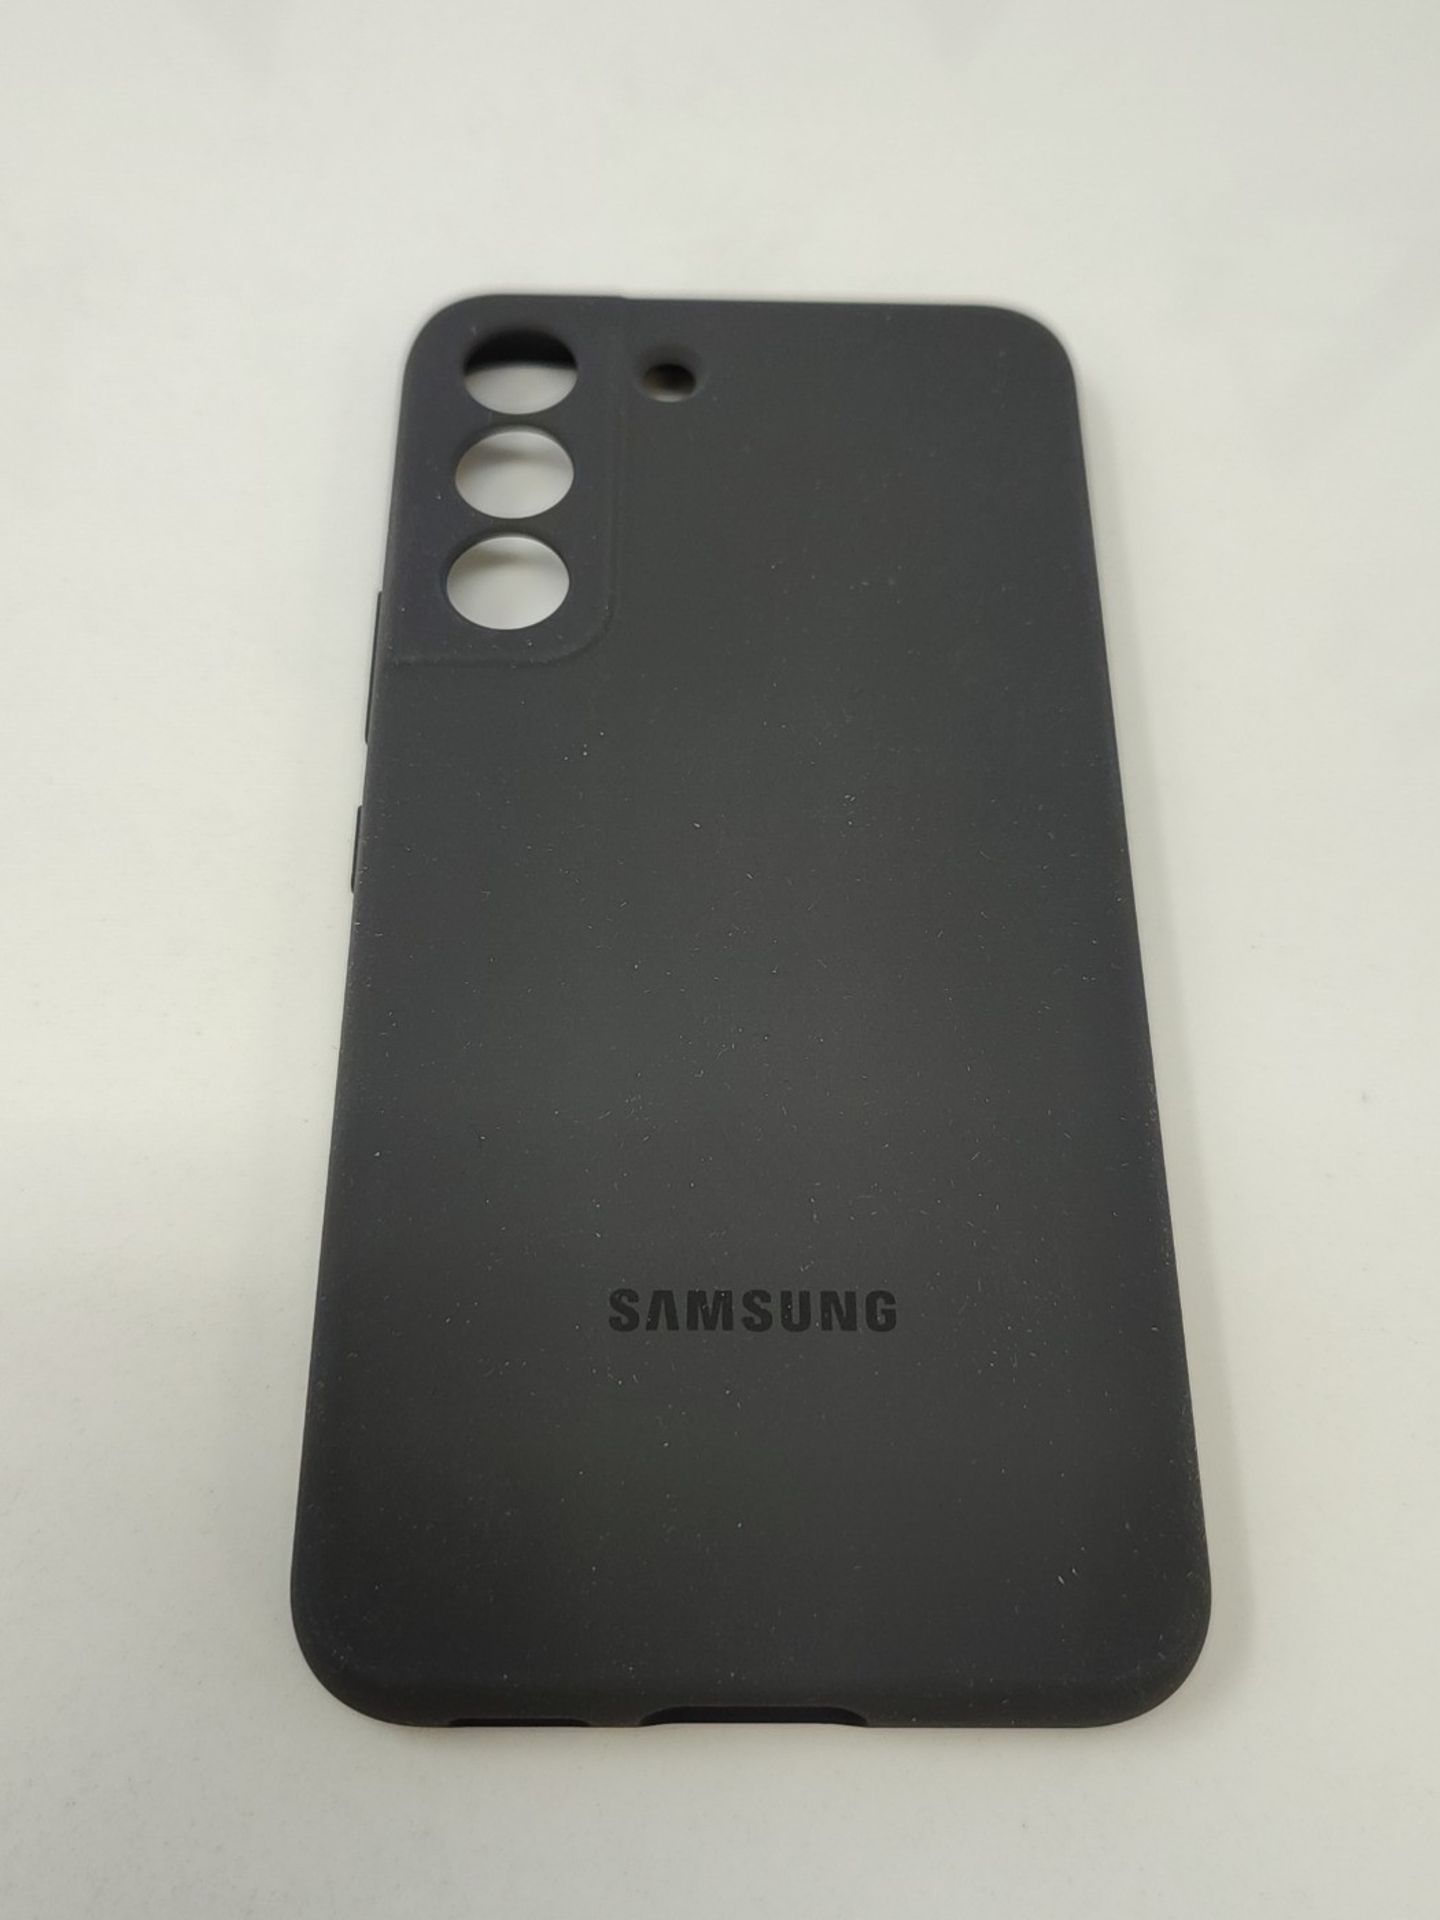 Samsung Silicone Smartphone Cover EF-PS901 for Galaxy S22, phone case, silicone, prote - Image 3 of 3